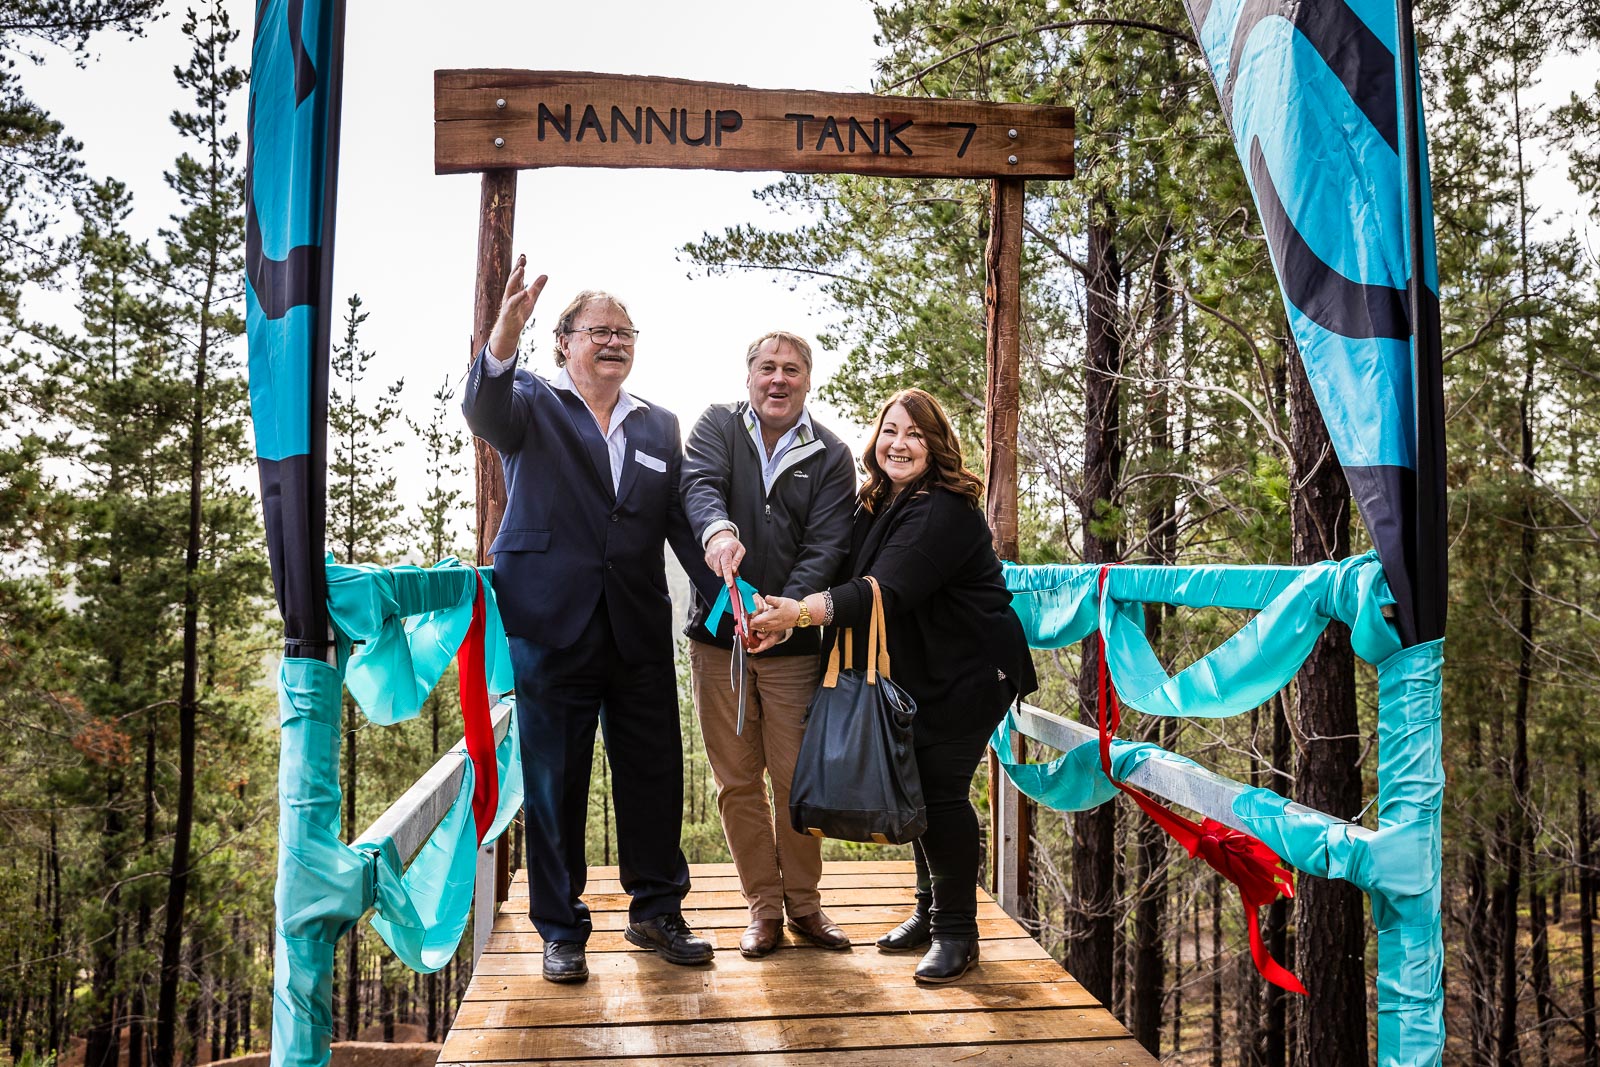 Nannup Tank 7 Mountain Bike Park officially opens.